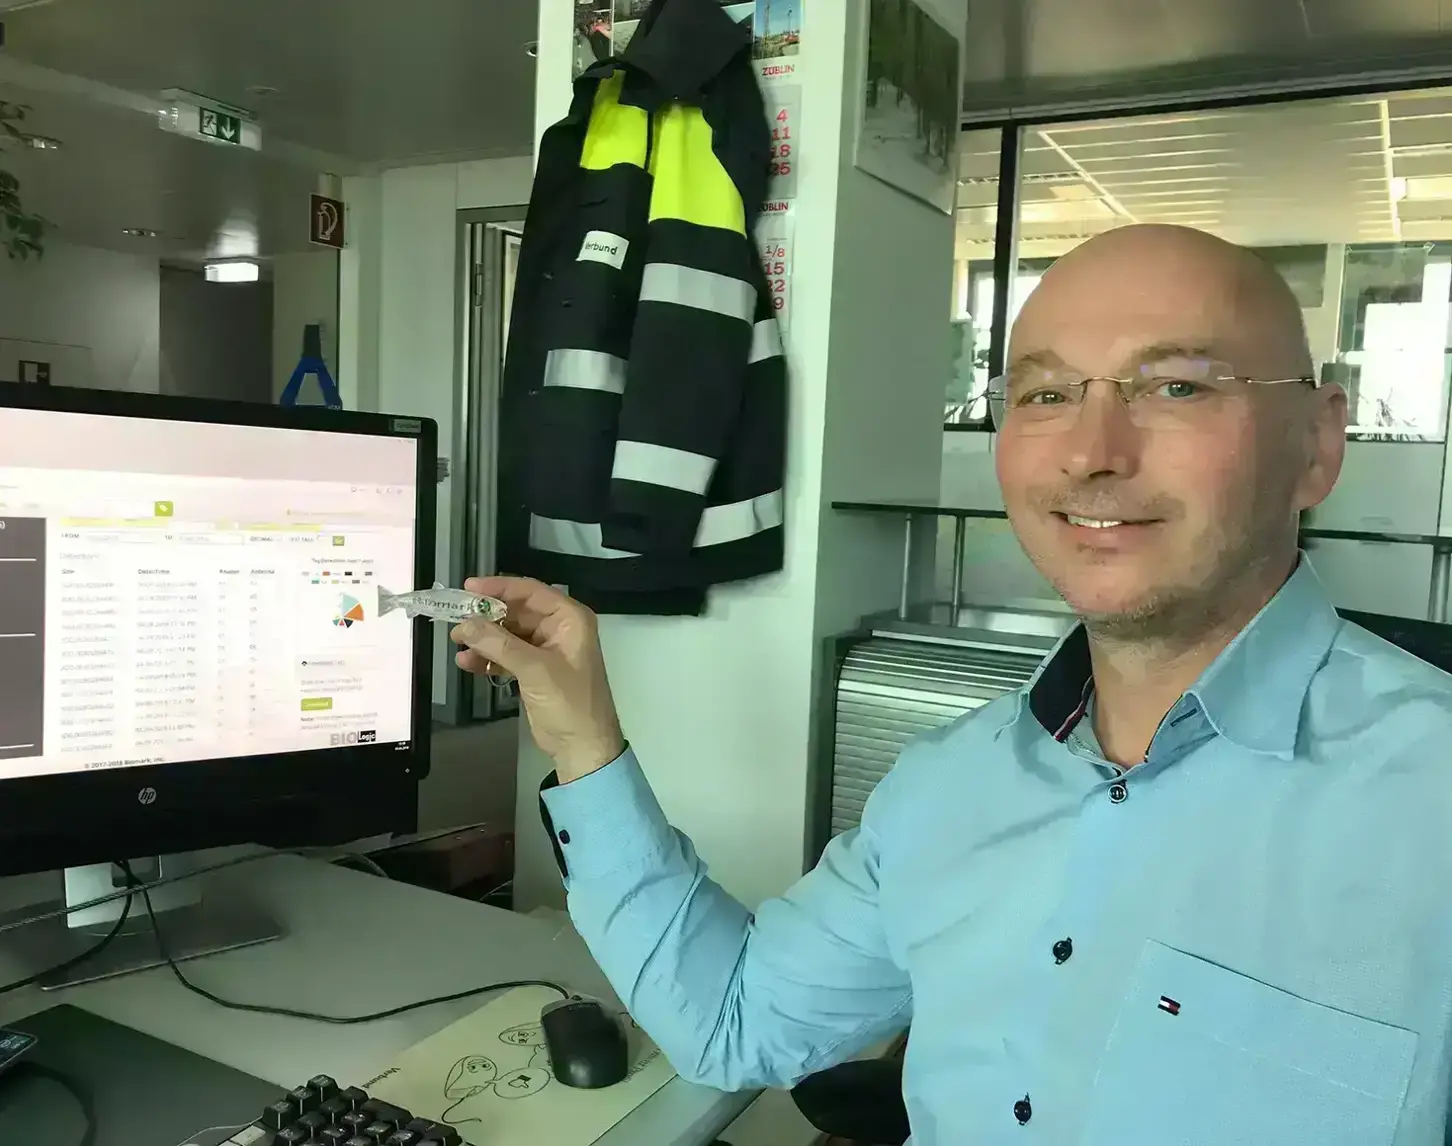 Walter Reckendorfer, an employee at VERBUND, shows our editor how fish monitoring works. They are sitting in front of a computer and Walter shows a small fish to the camera.